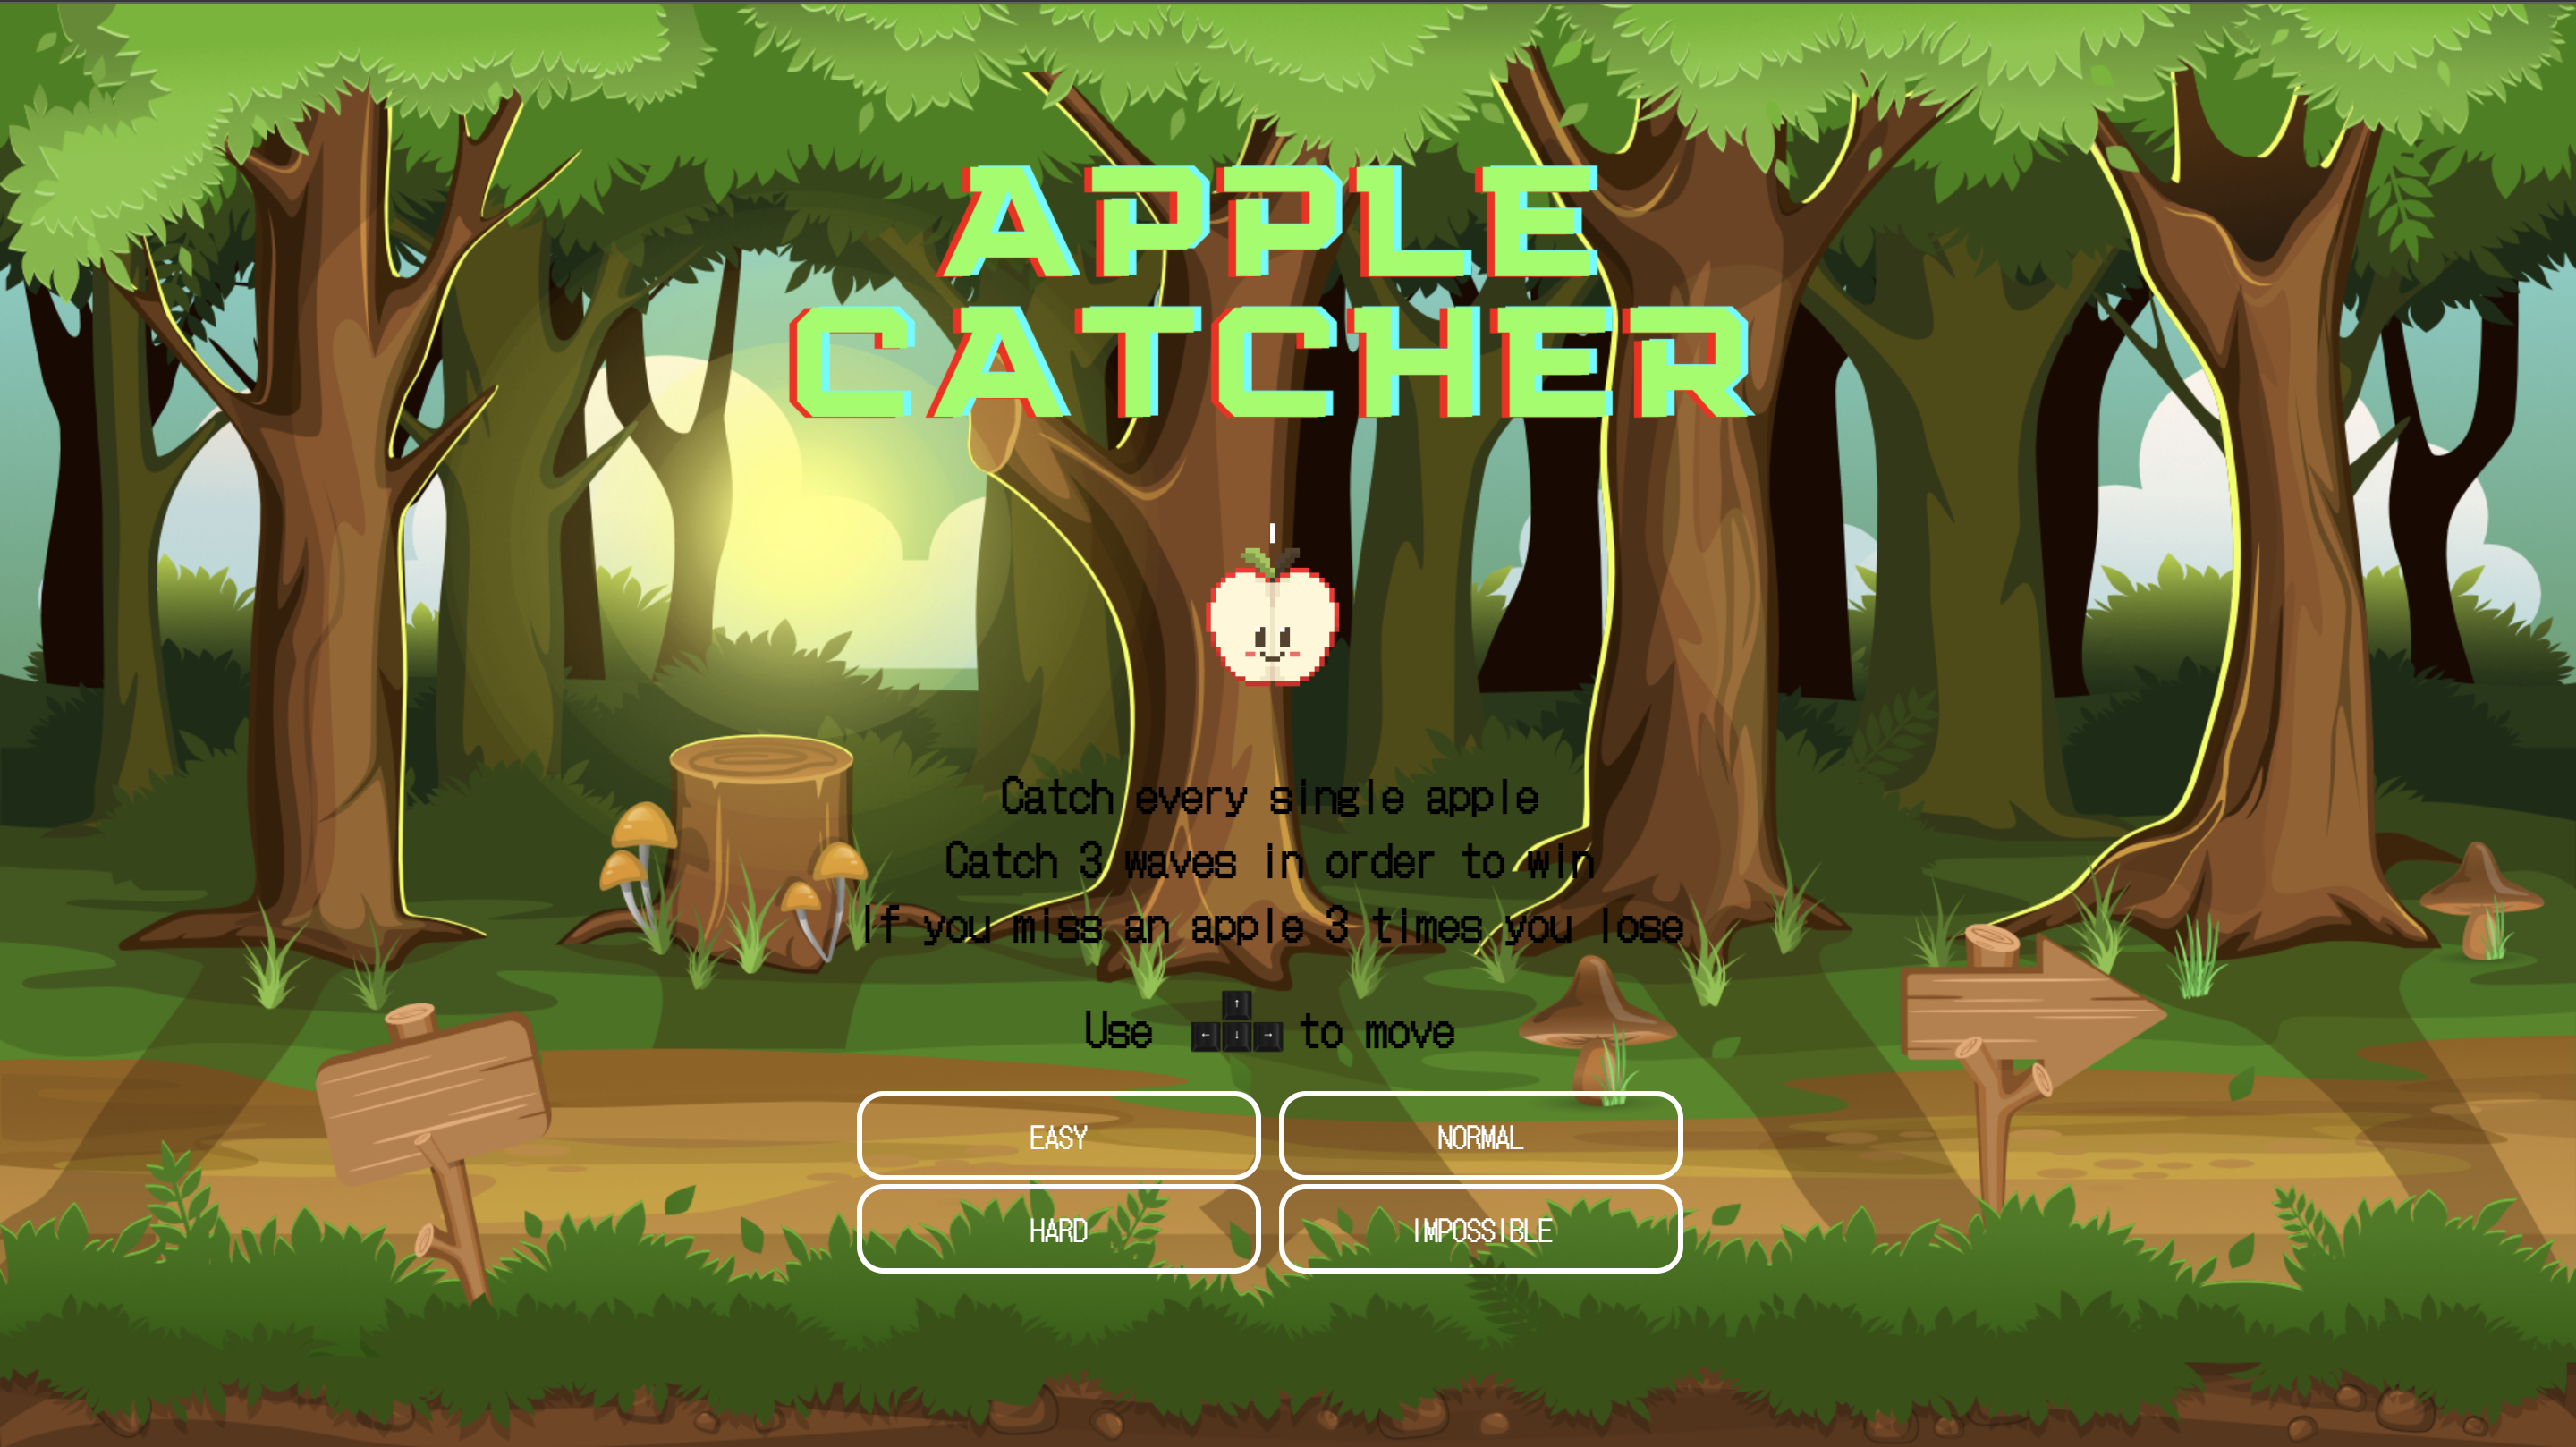 A retro video game with a red apple in the center of the screen.